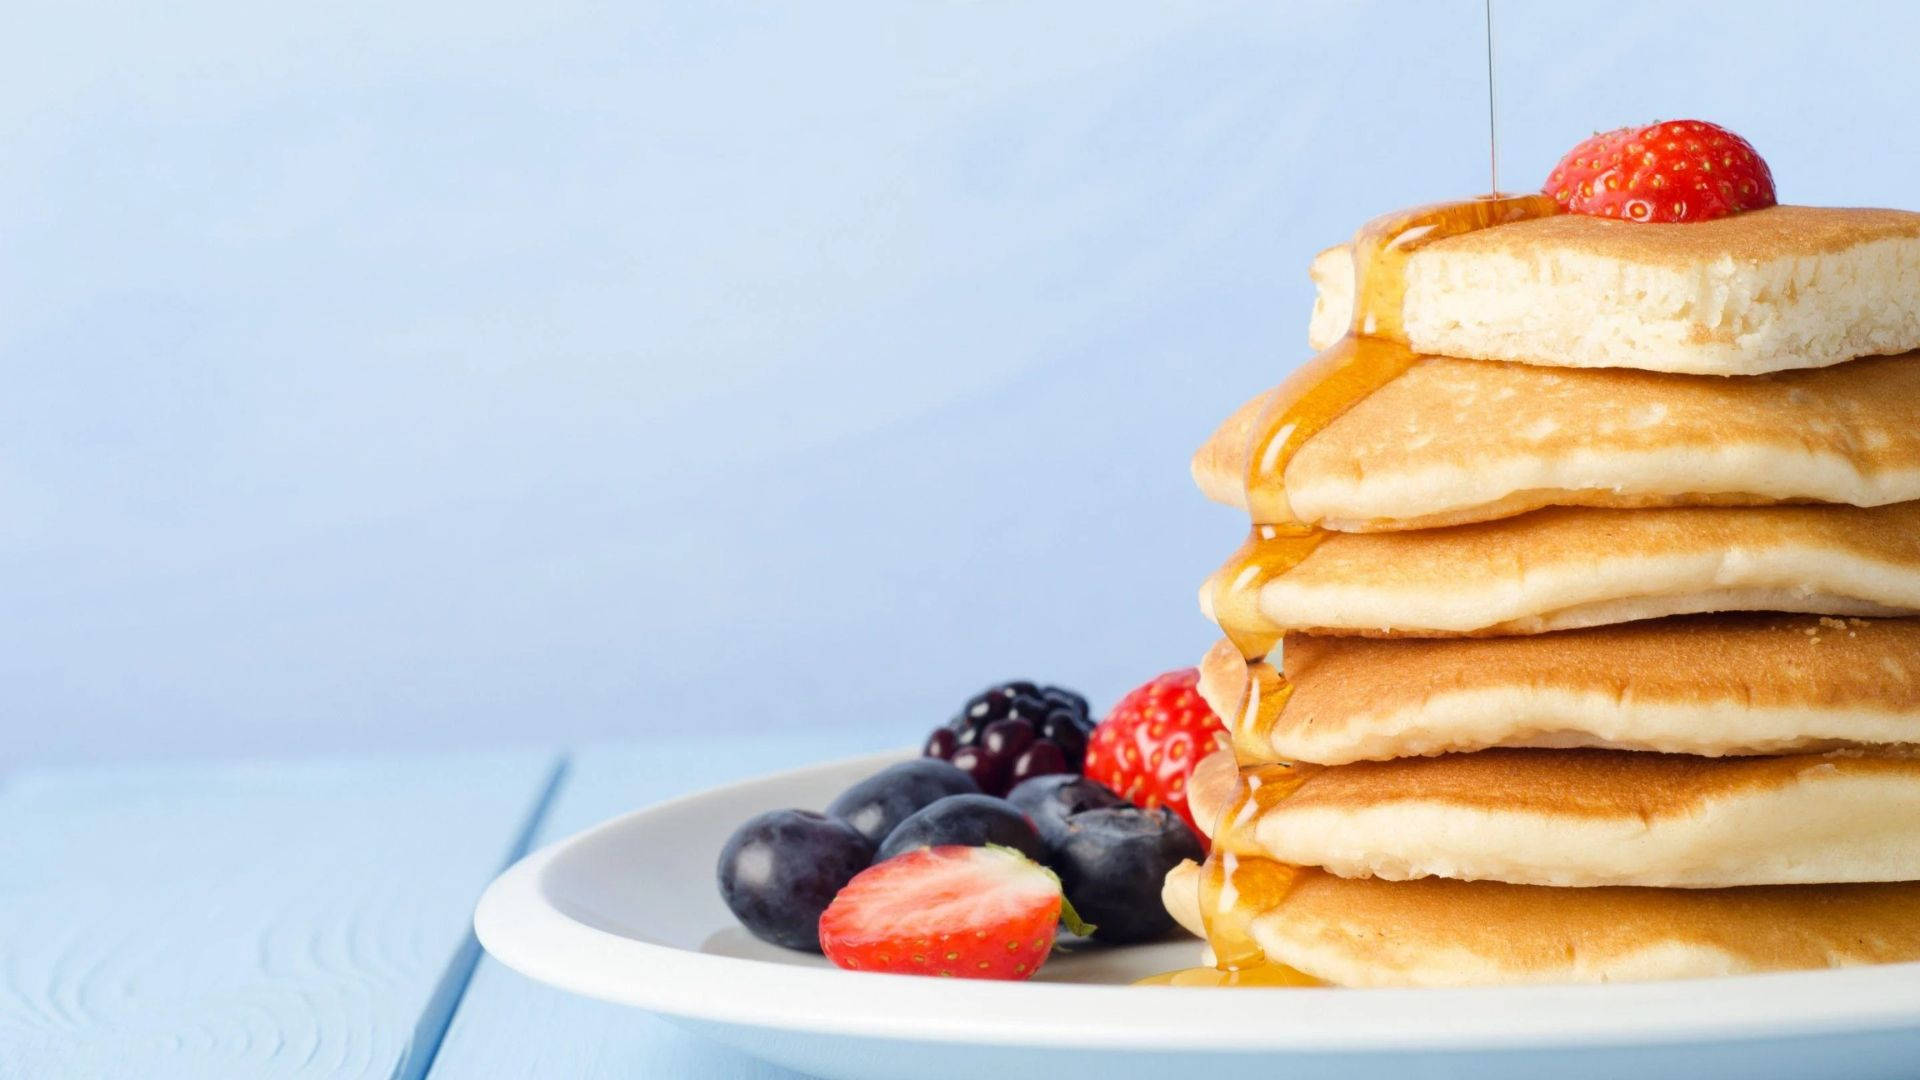 Pancakes And Berries On The Plate Background